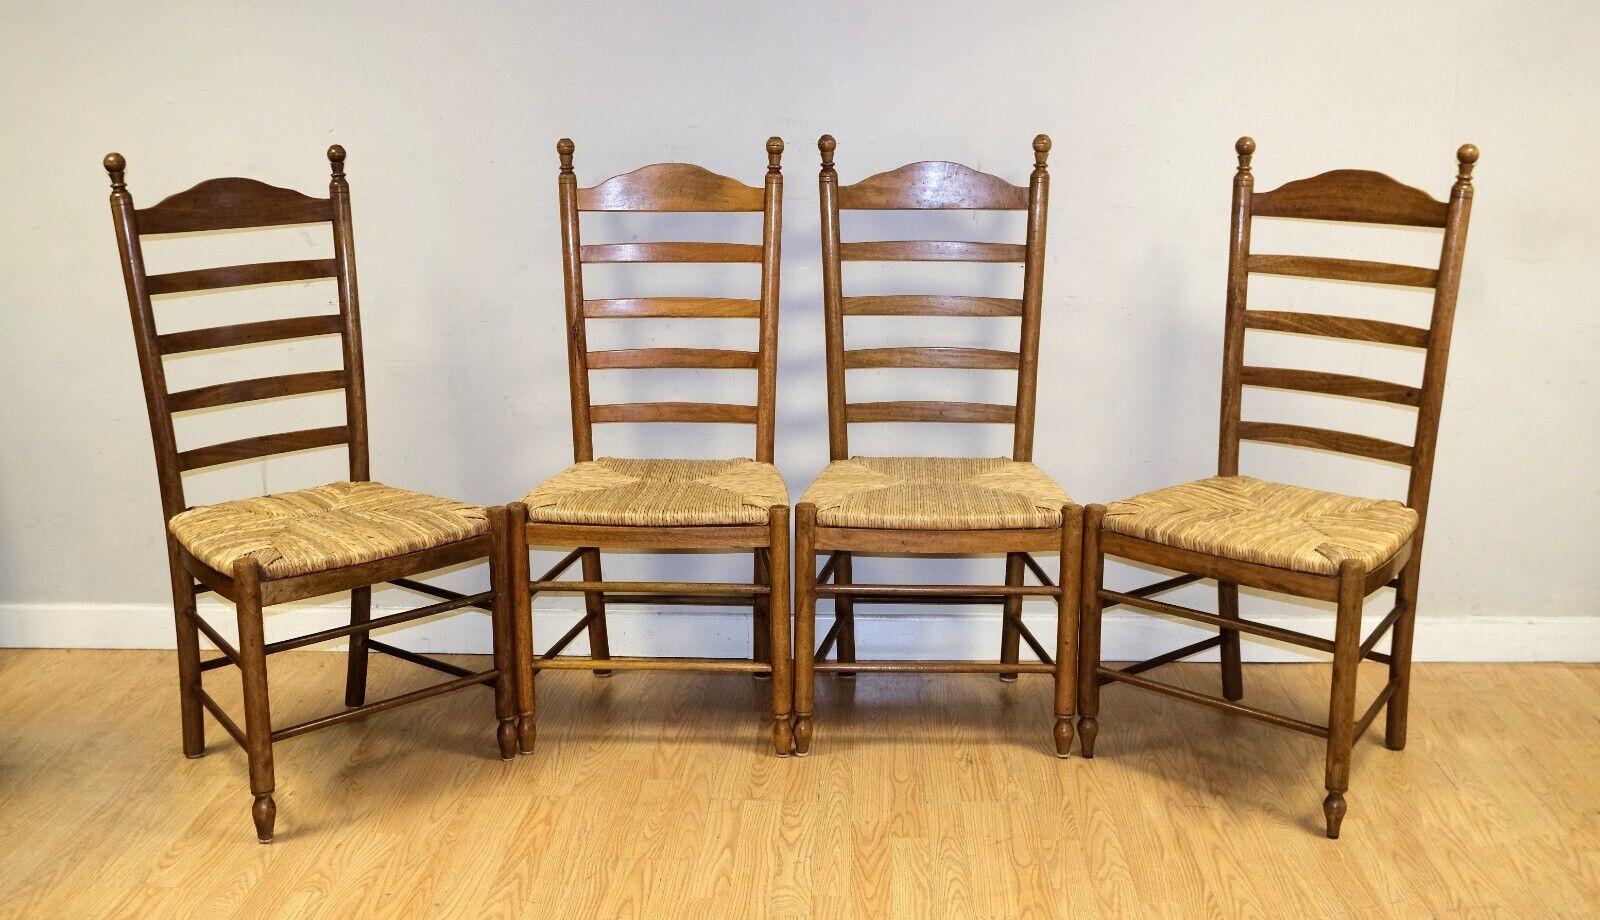 We are delighted to offer for sale this lovely set of 4 Farmhouse Oak rush seat vintage ladder back dining chairs.

This versatile and stunning set is presented with original rush woven straw seat and oak frame. The simplicity is just perfect for